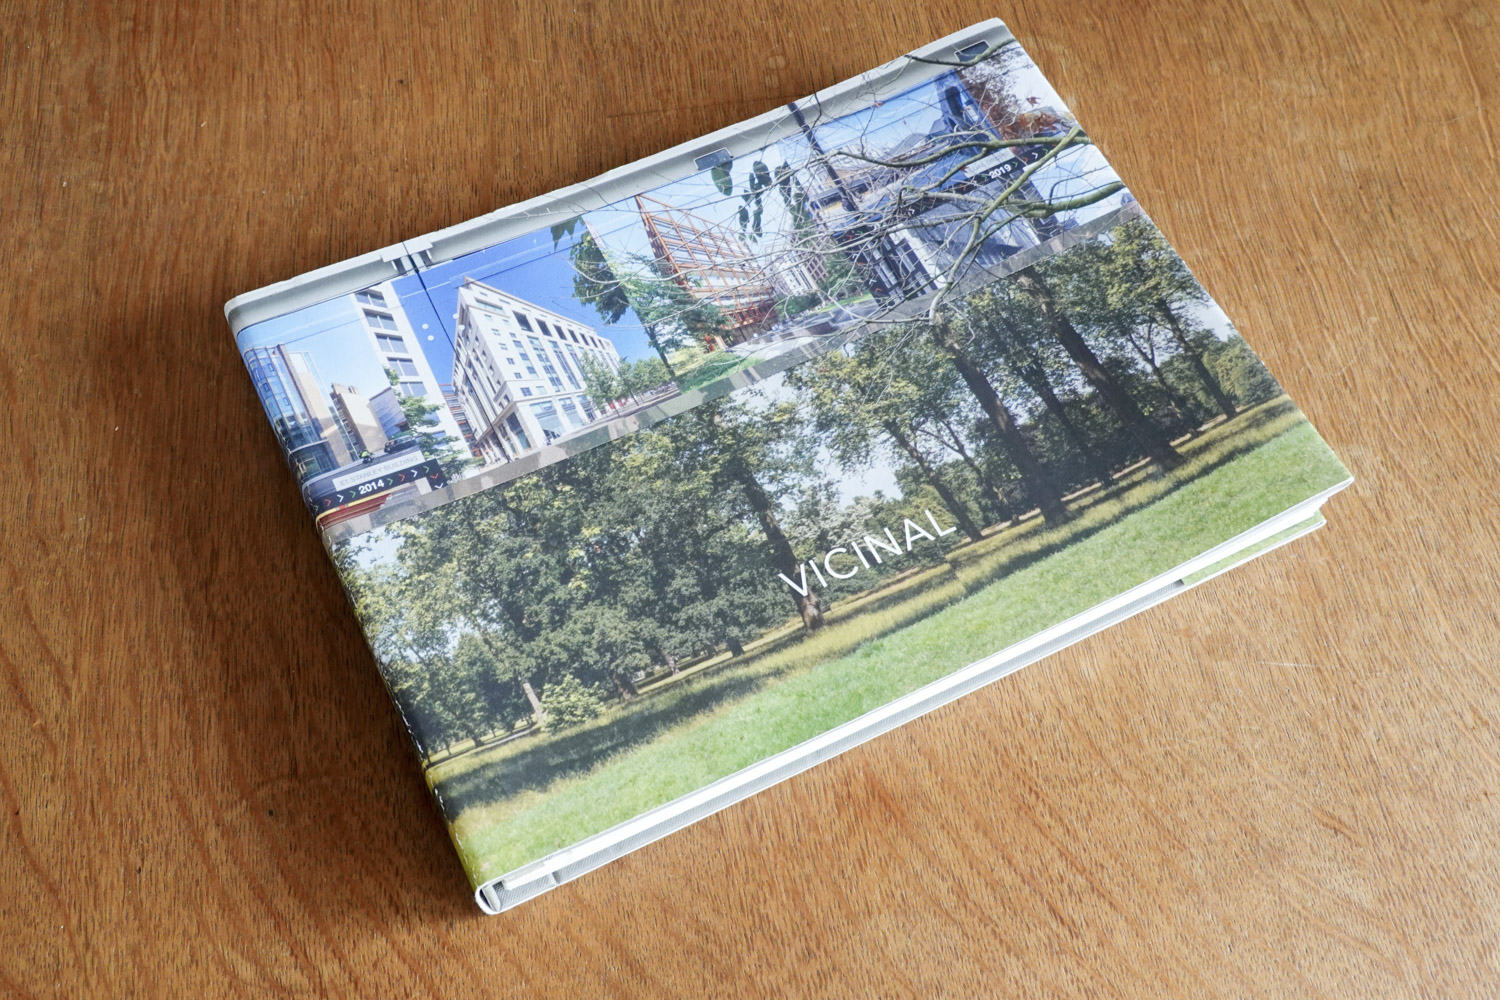 the cover of the book has a photo of a hoarding on which can be seen trees and pictures of new buildings